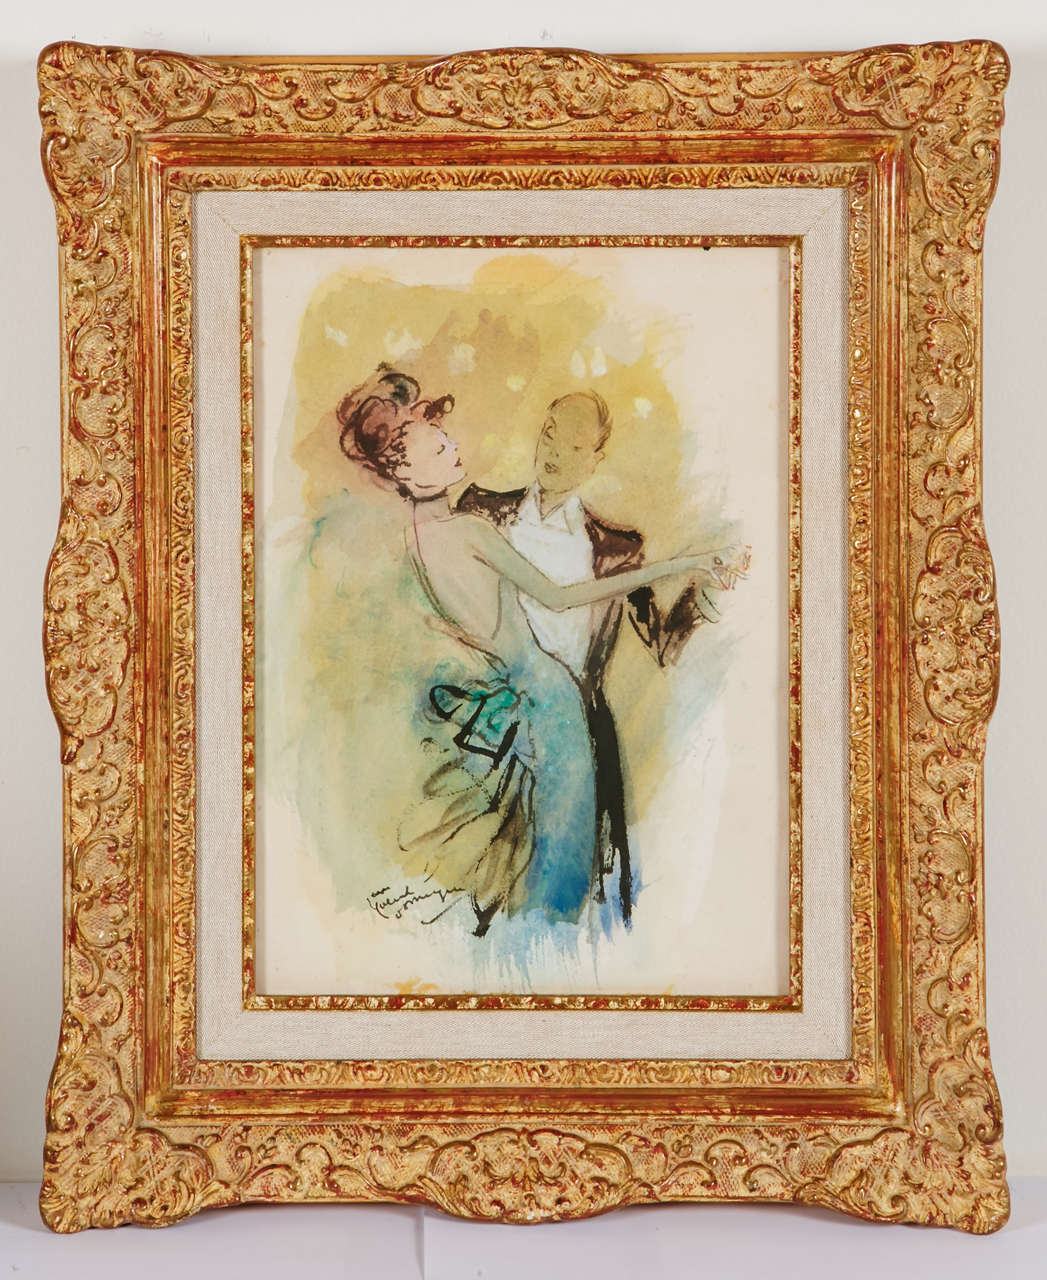 Beautiful watercolor representing a dancing couple in the 1940's by Jean-Gabriel Domergue (1889-1962). Watercolor and ink on paper signed in the bottom left 'Jean-Gabriel Domergue'.

Source: Artist's wife, previous Janet and Howard Thomas